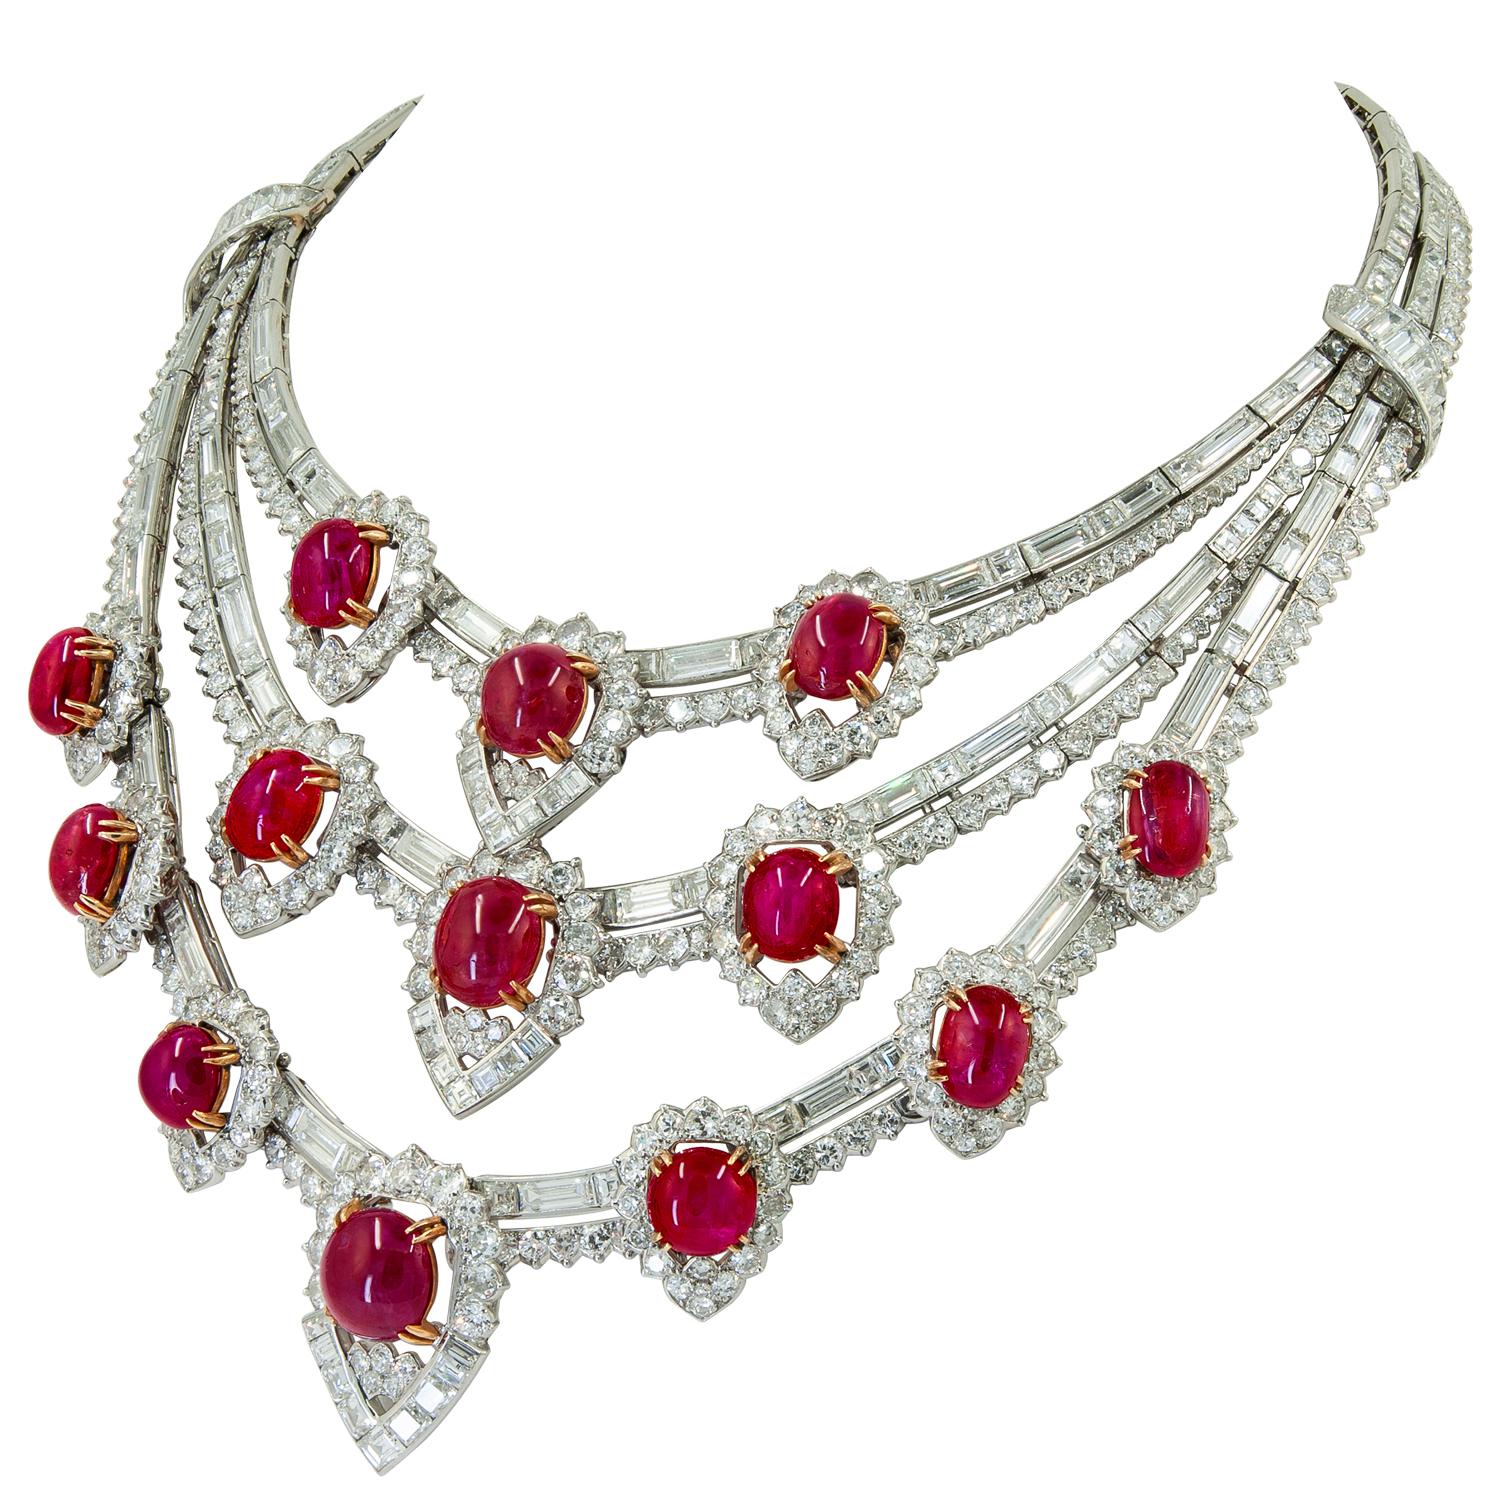 VAN CLEEF & ARPELS Retro Ruby, Diamond Necklace.
An 18k yellow gold and platinum necklace, set with oval and cabochon rubies and diamonds, signed Van Cleef & Arpels.
Dimensions approx. 37.5 cm ( 14.75 inches)
Gross weight approx. 208.7 grams
Stamped